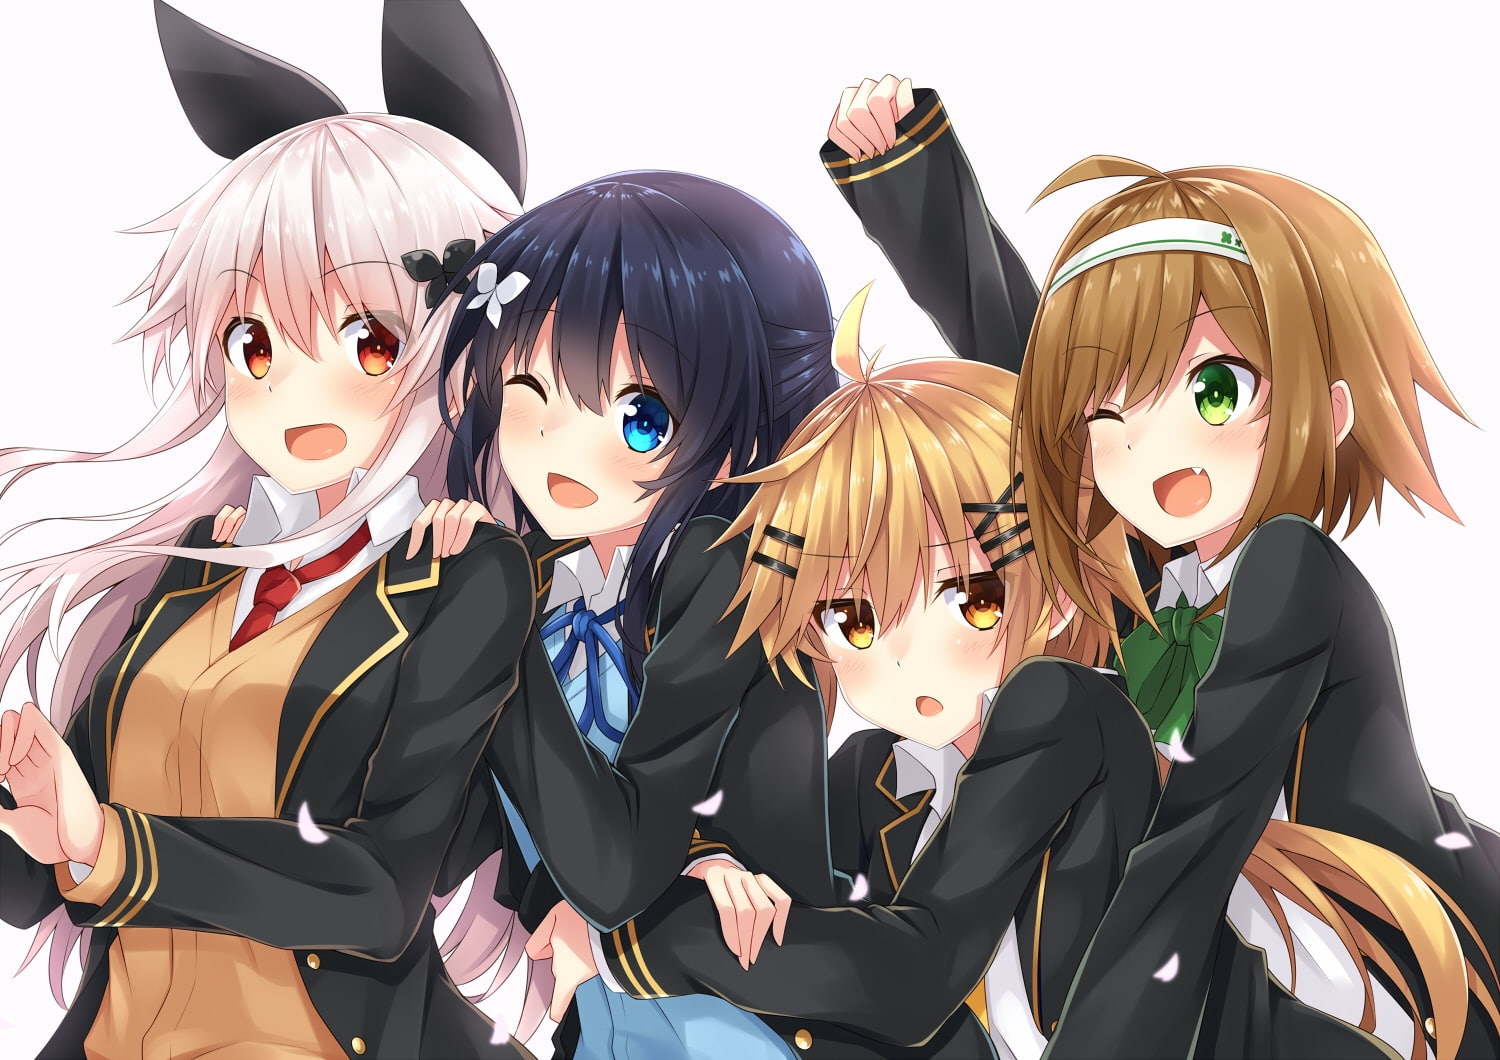 anime girls, friends, wink, smiling, happy, bunny ears, group of people